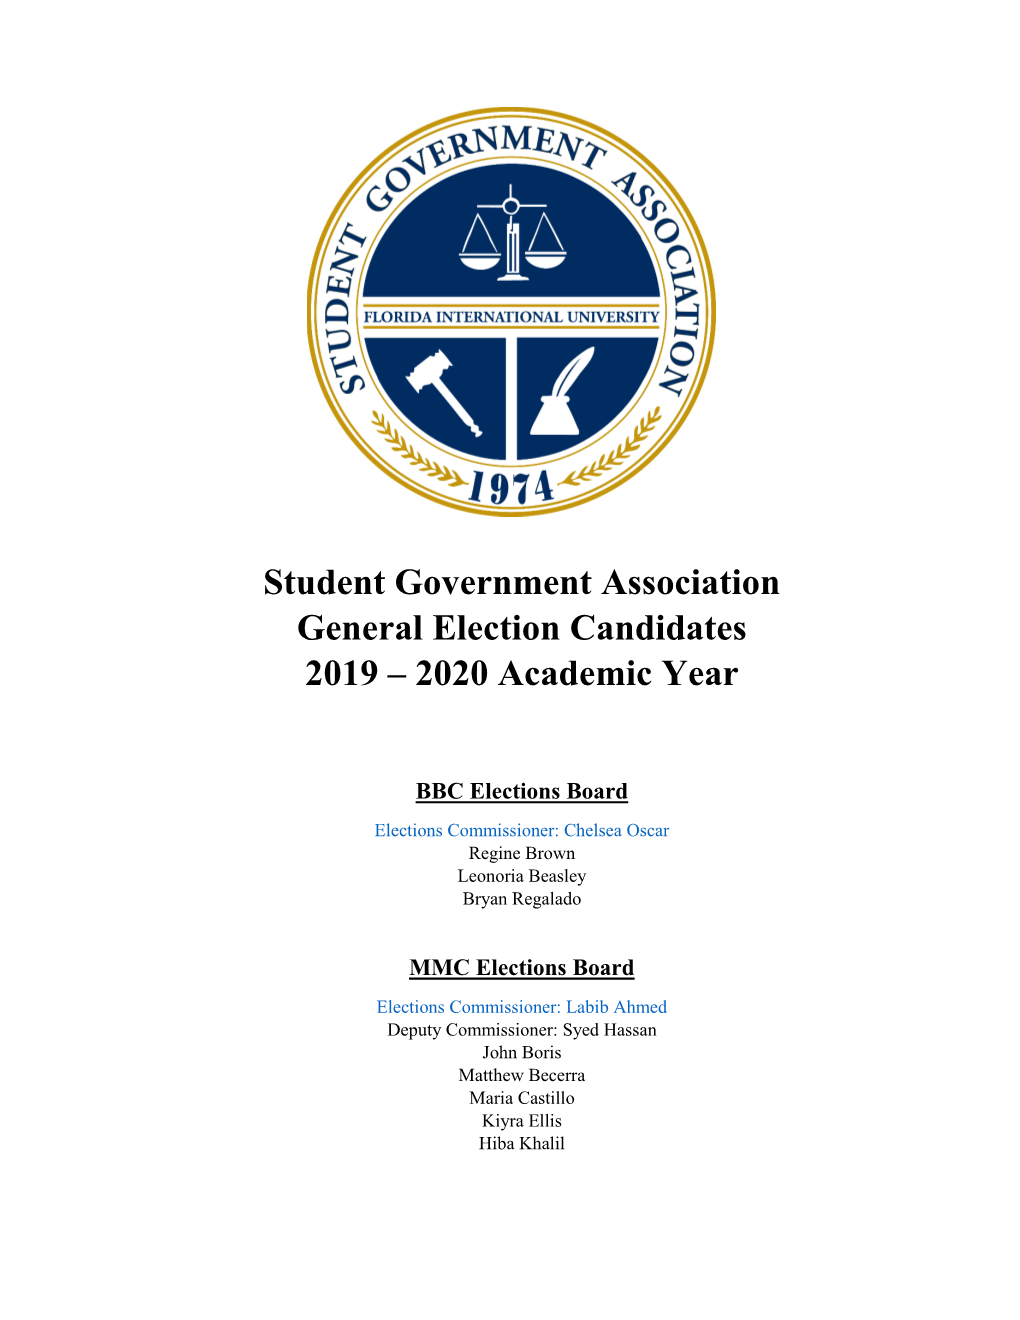 Student Government Association General Election Candidates 2019 – 2020 Academic Year